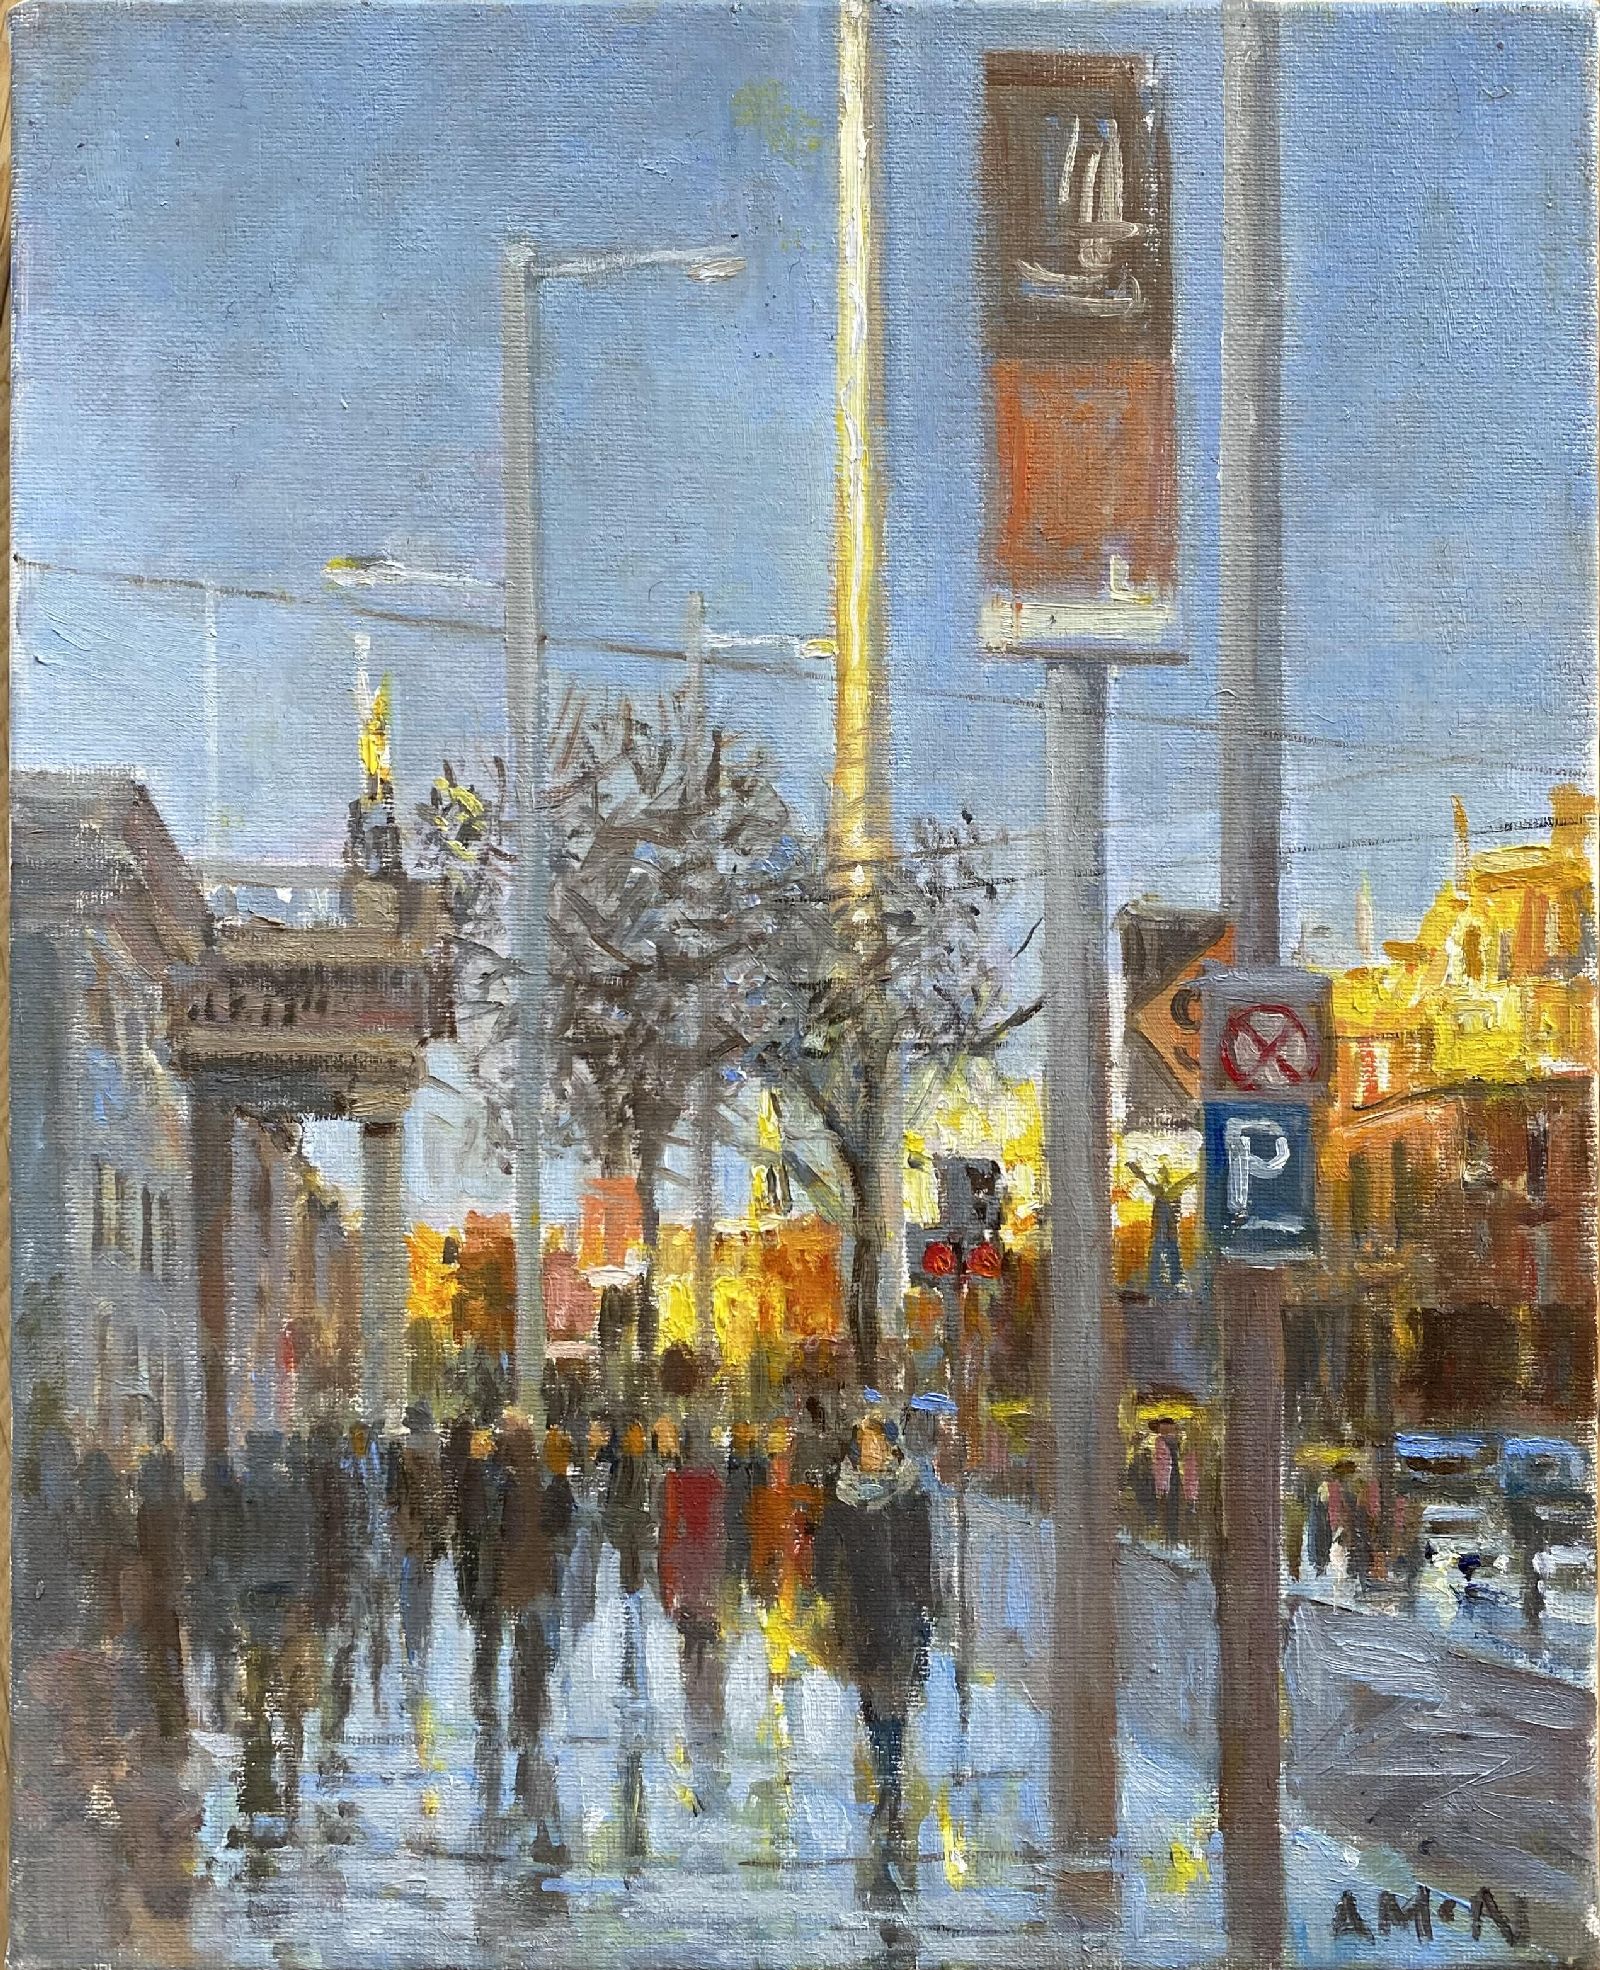 O Connell St. Winter sun by Anne Mc Nulty